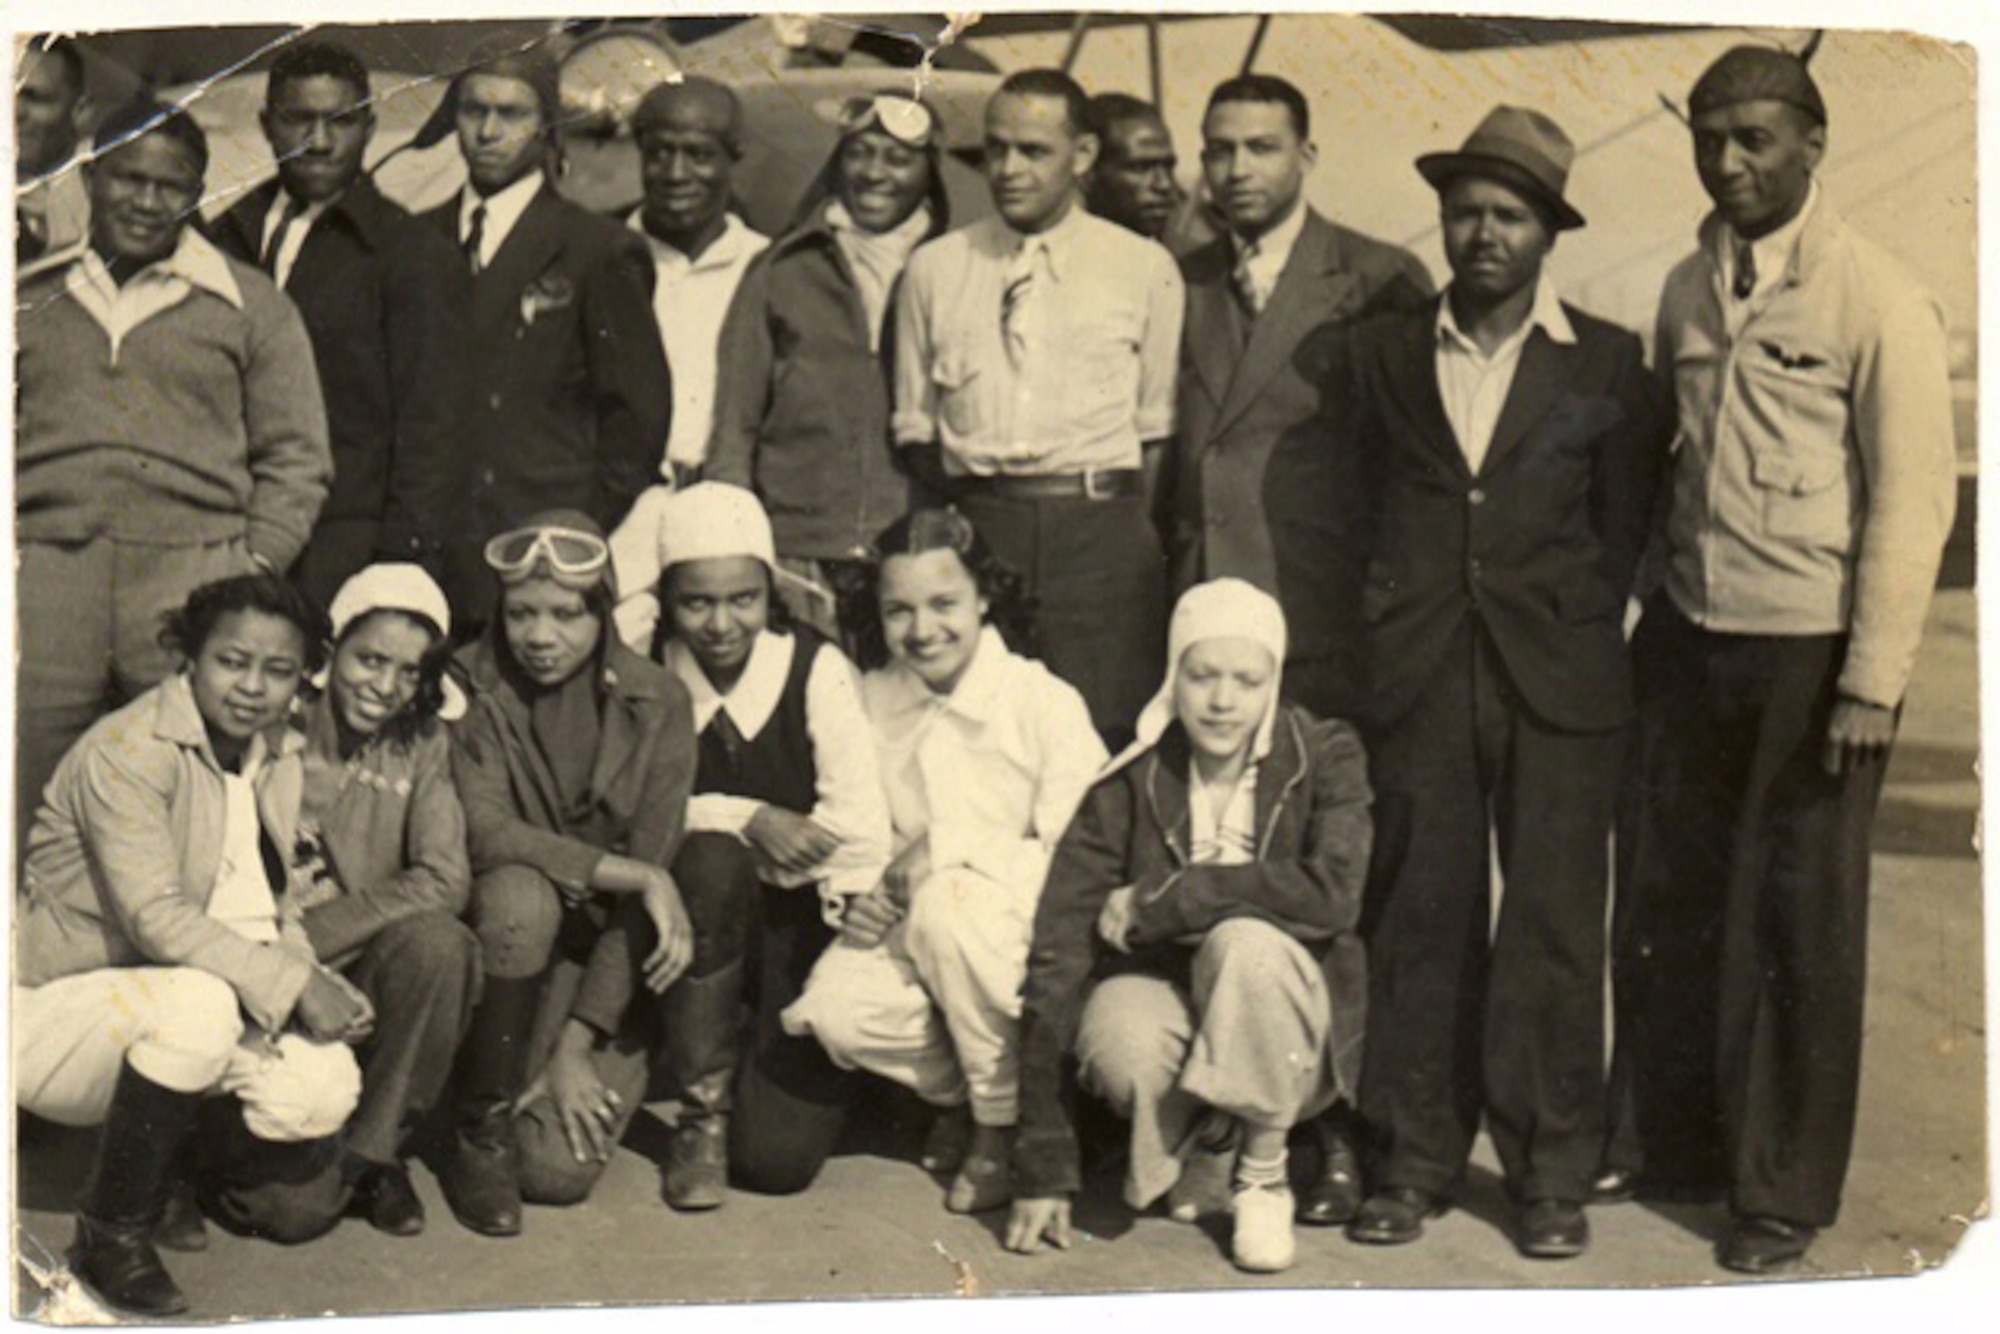 William J. Powell (center) was an aviation entrepeneur who advanced African-American participation in flying.